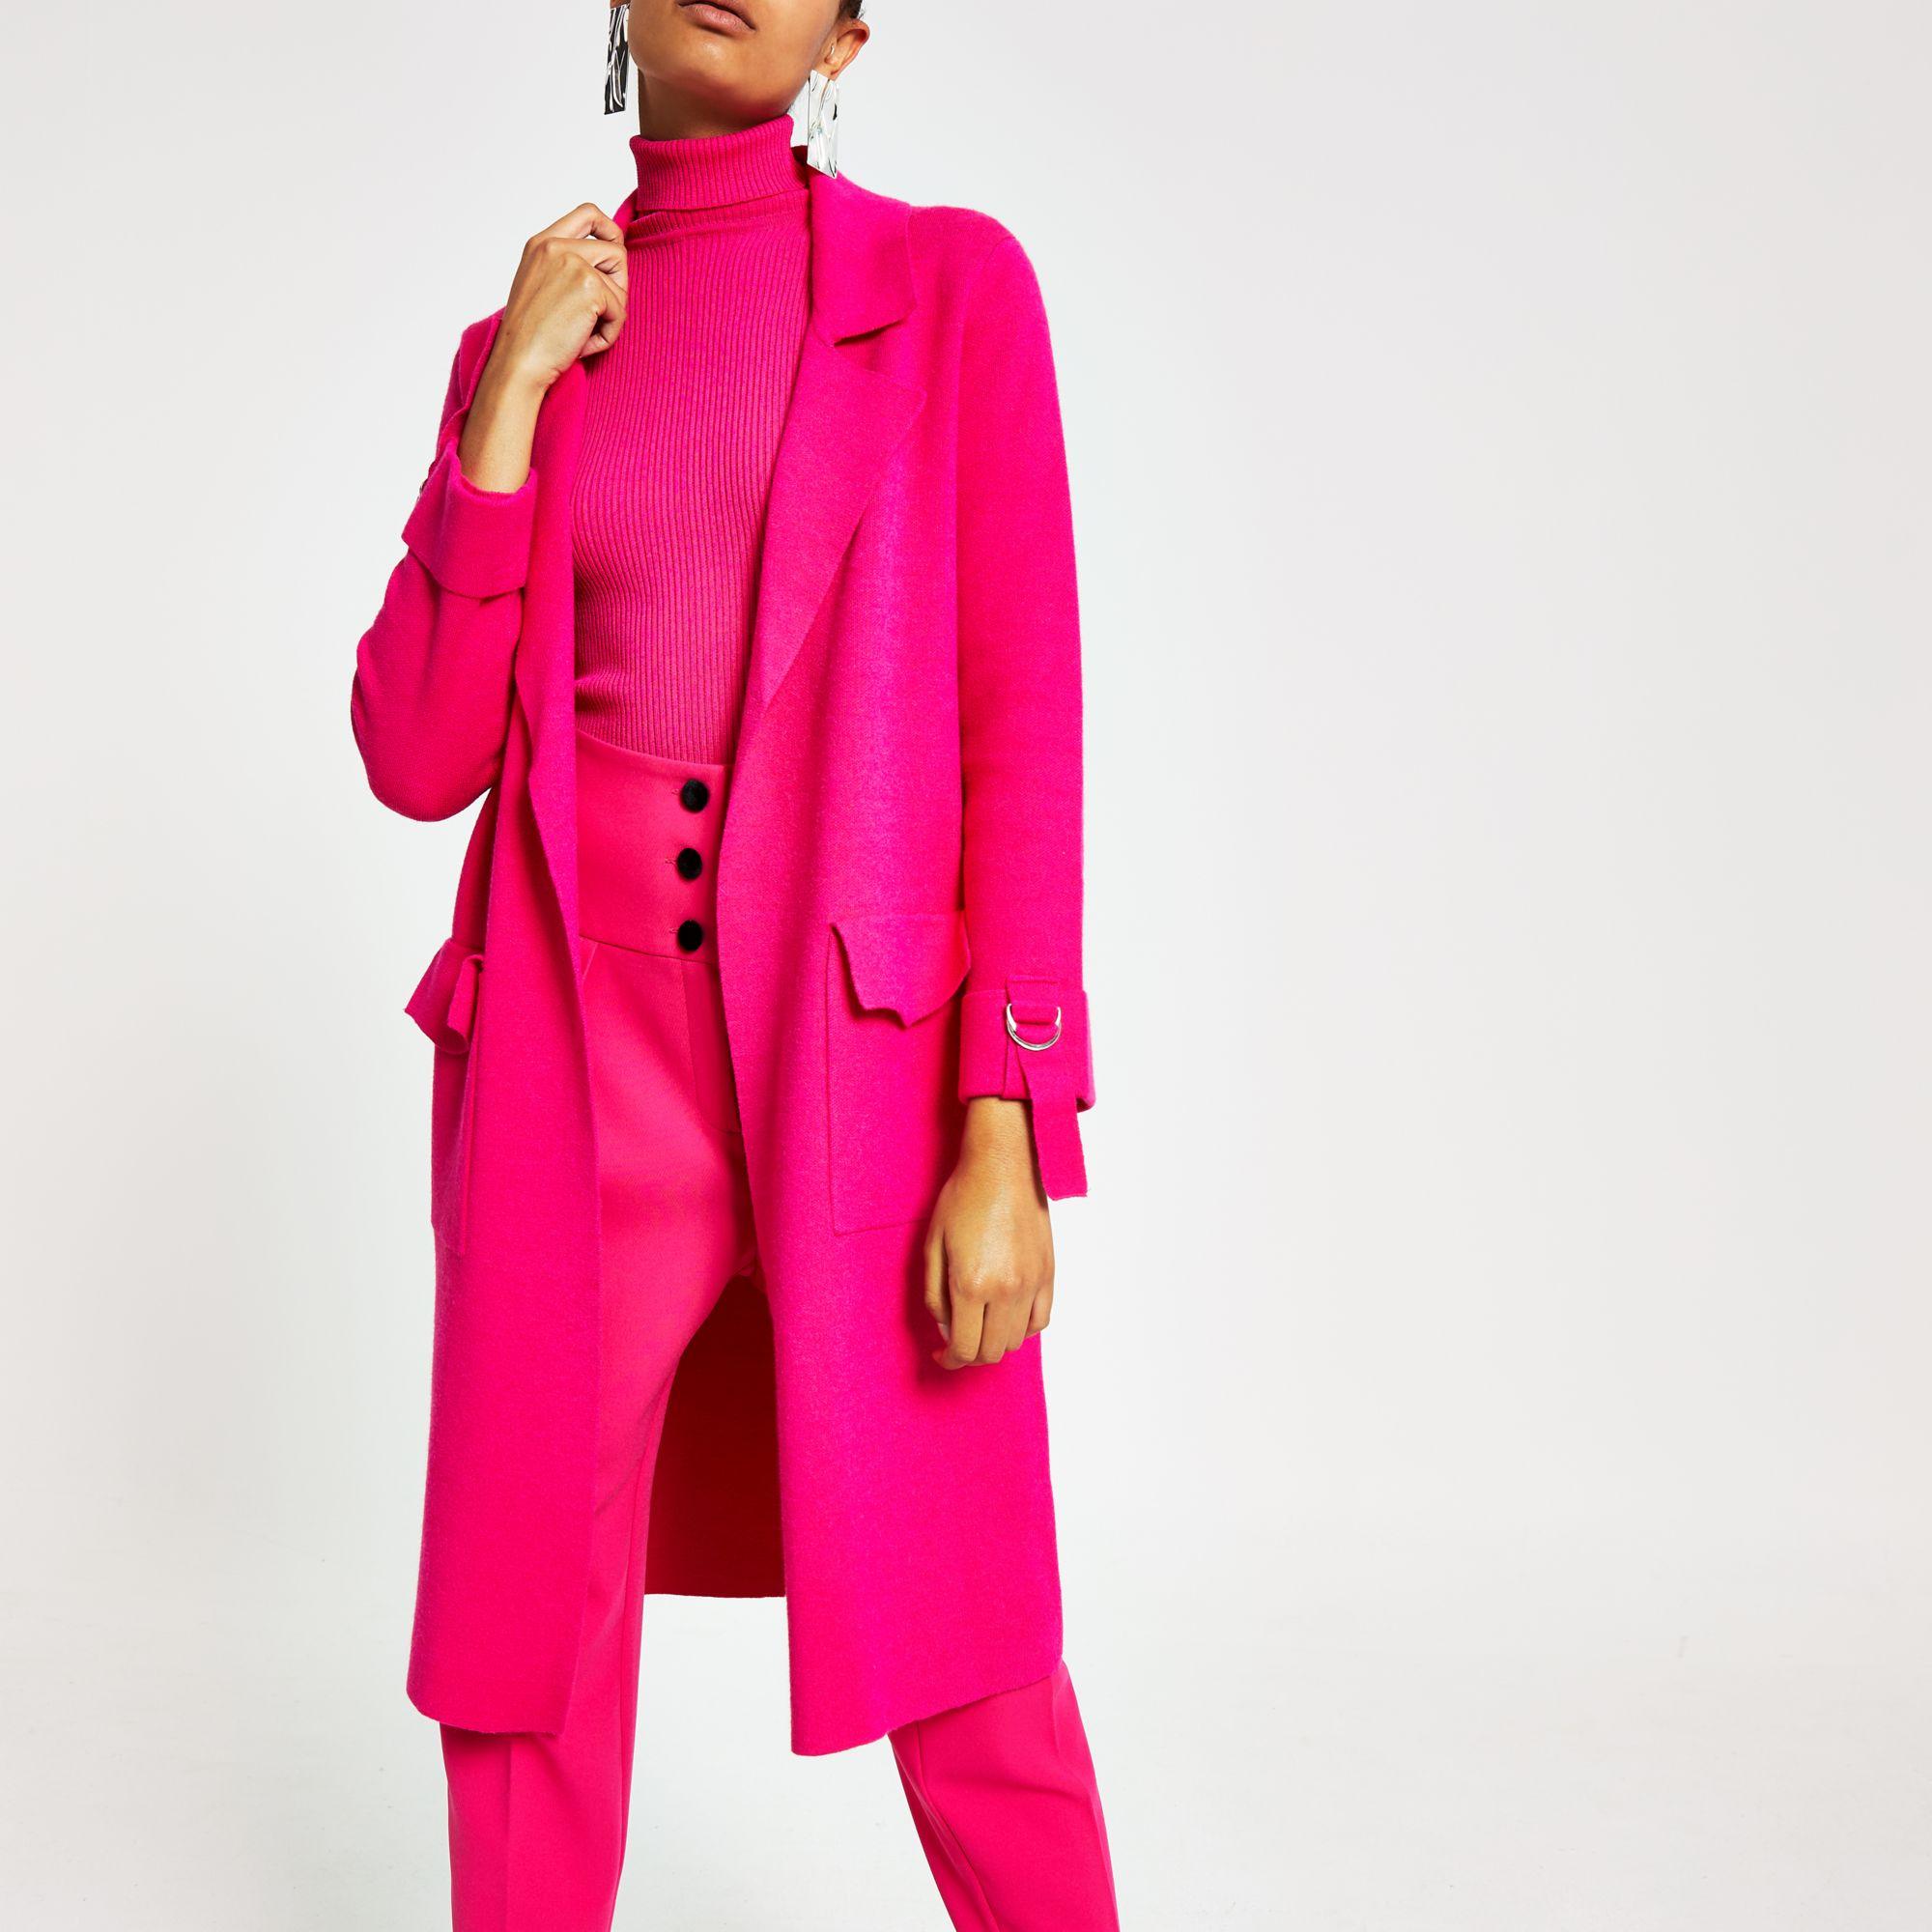 River Island Bright Pink Knitted Duster Jacket | Lyst